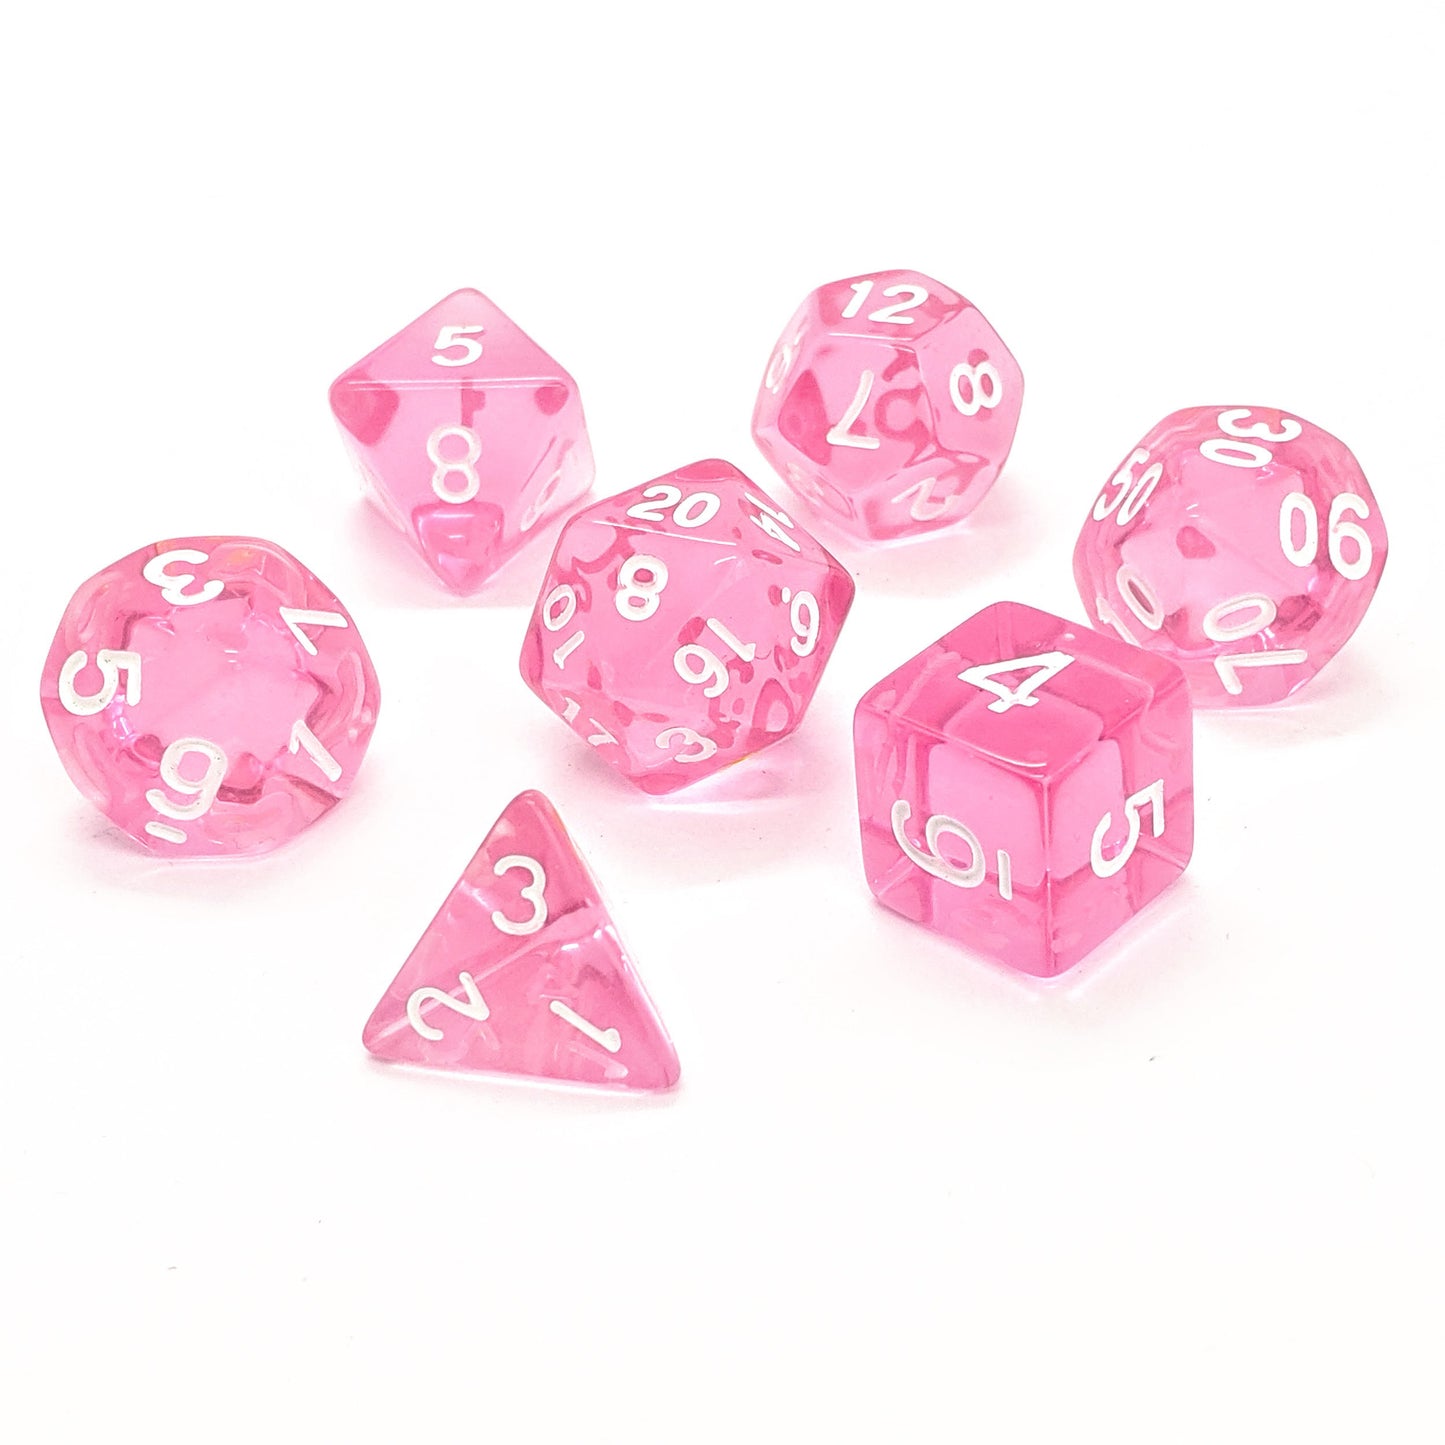 FREE Today: Infinity Gems Pink Dice Set